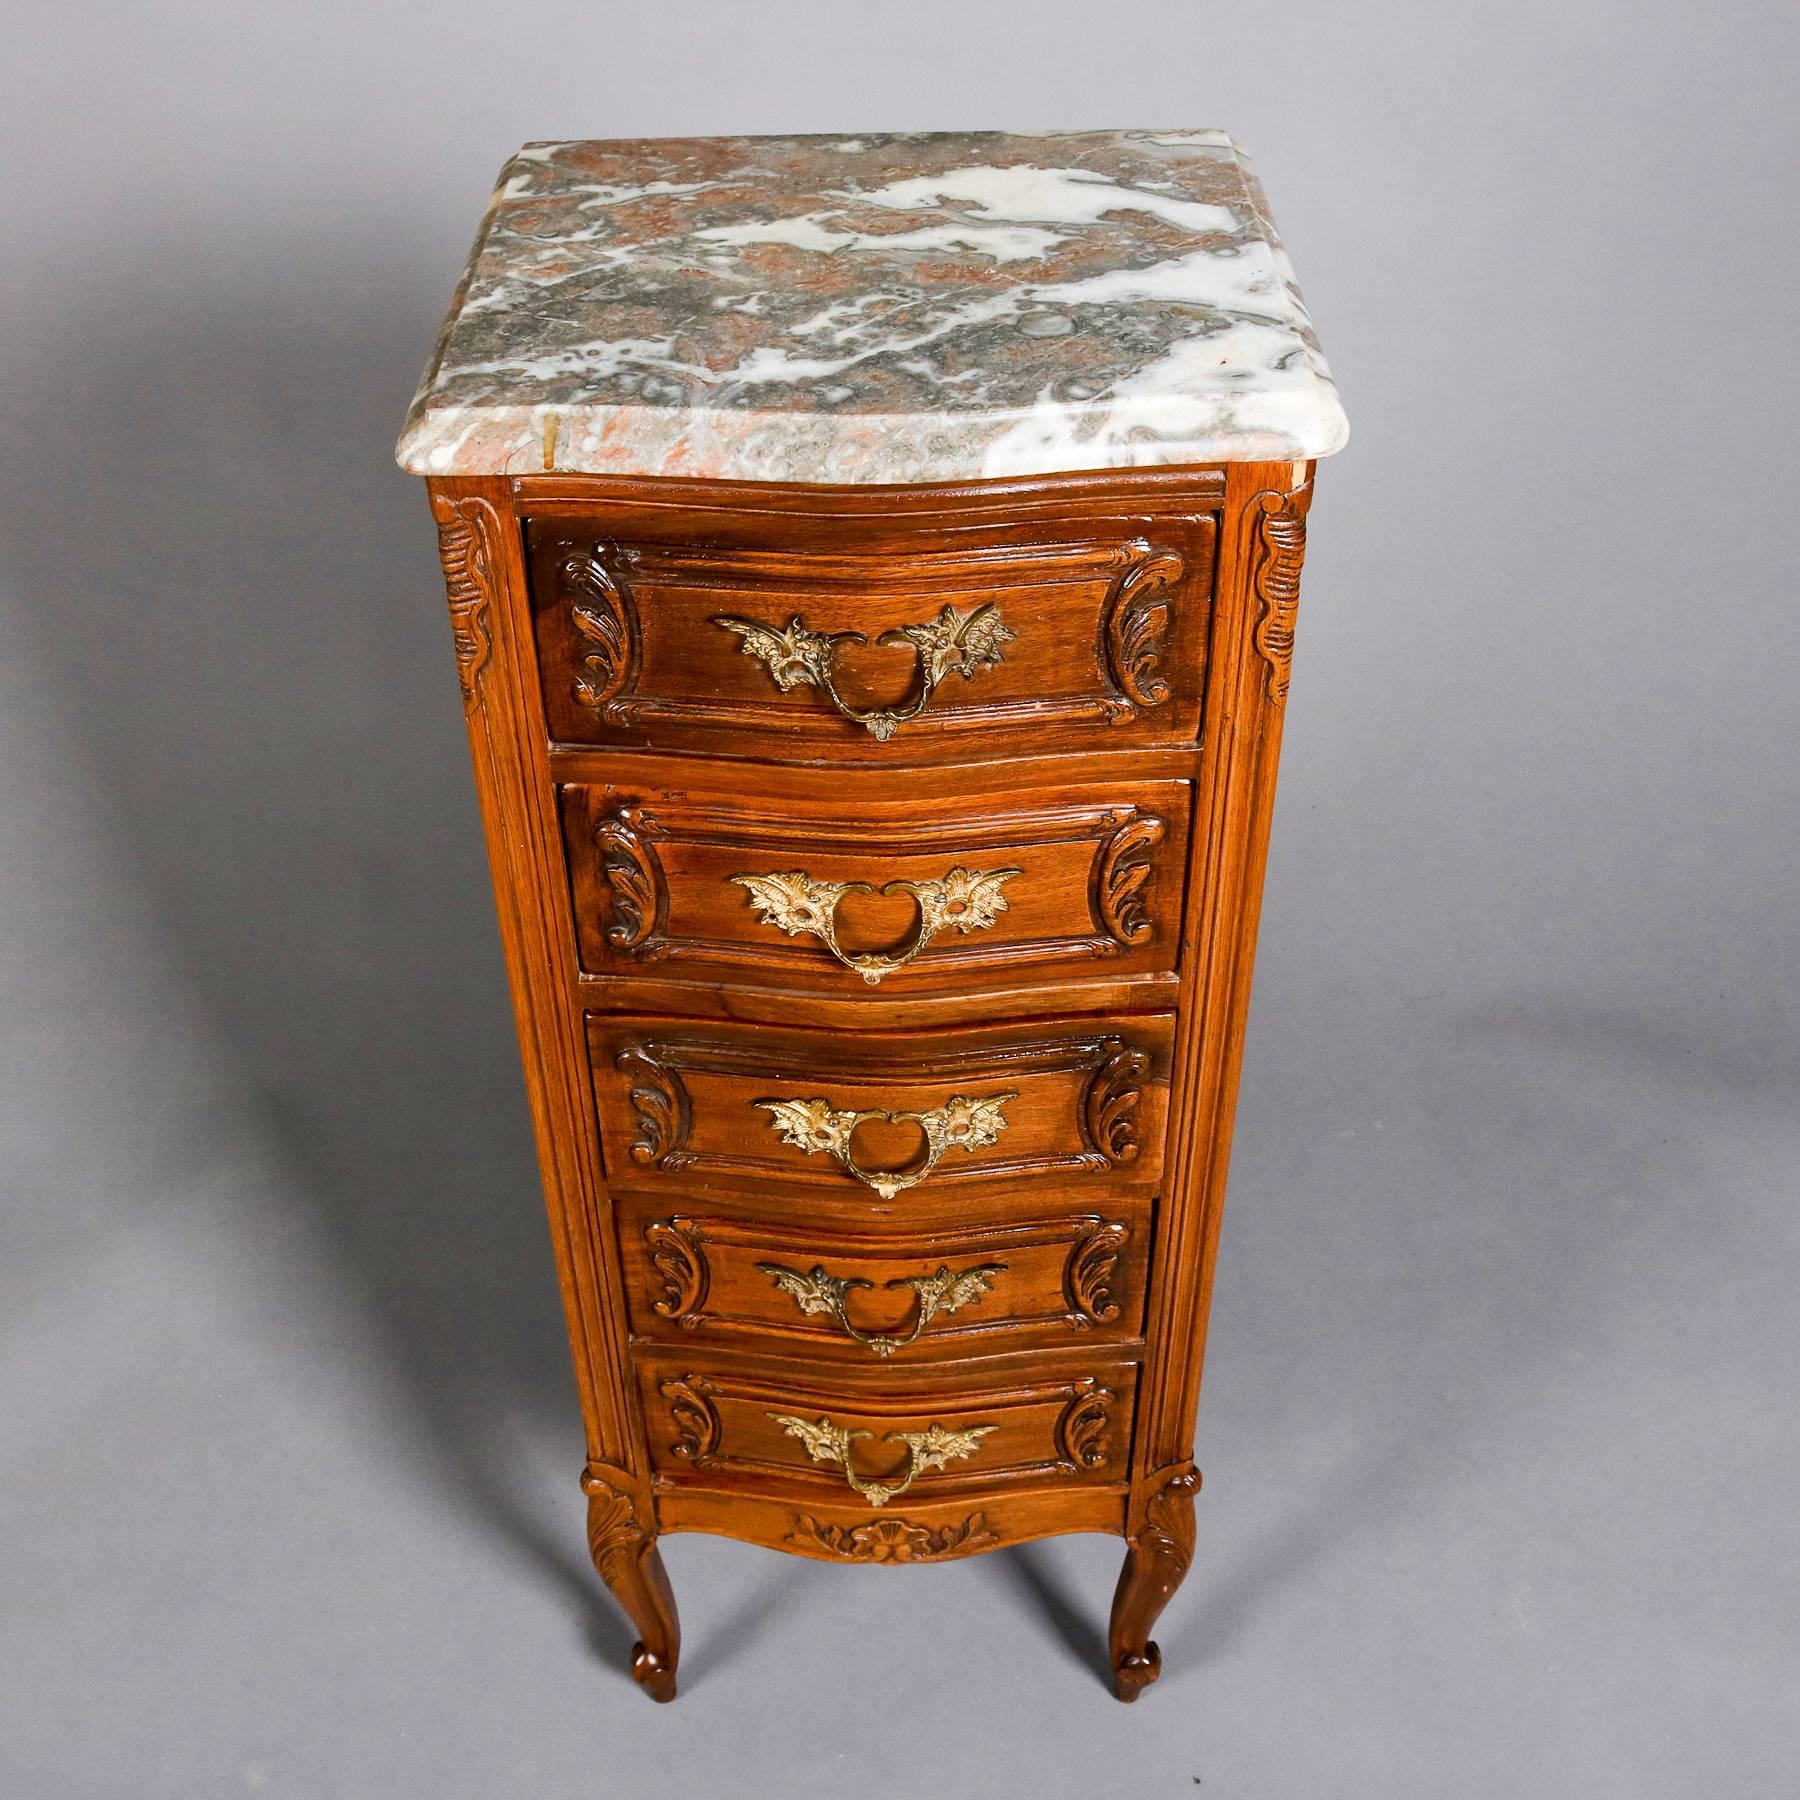 20th Century French Louis XVI Style Walnut and Marble with Bronze Lingerie Chest